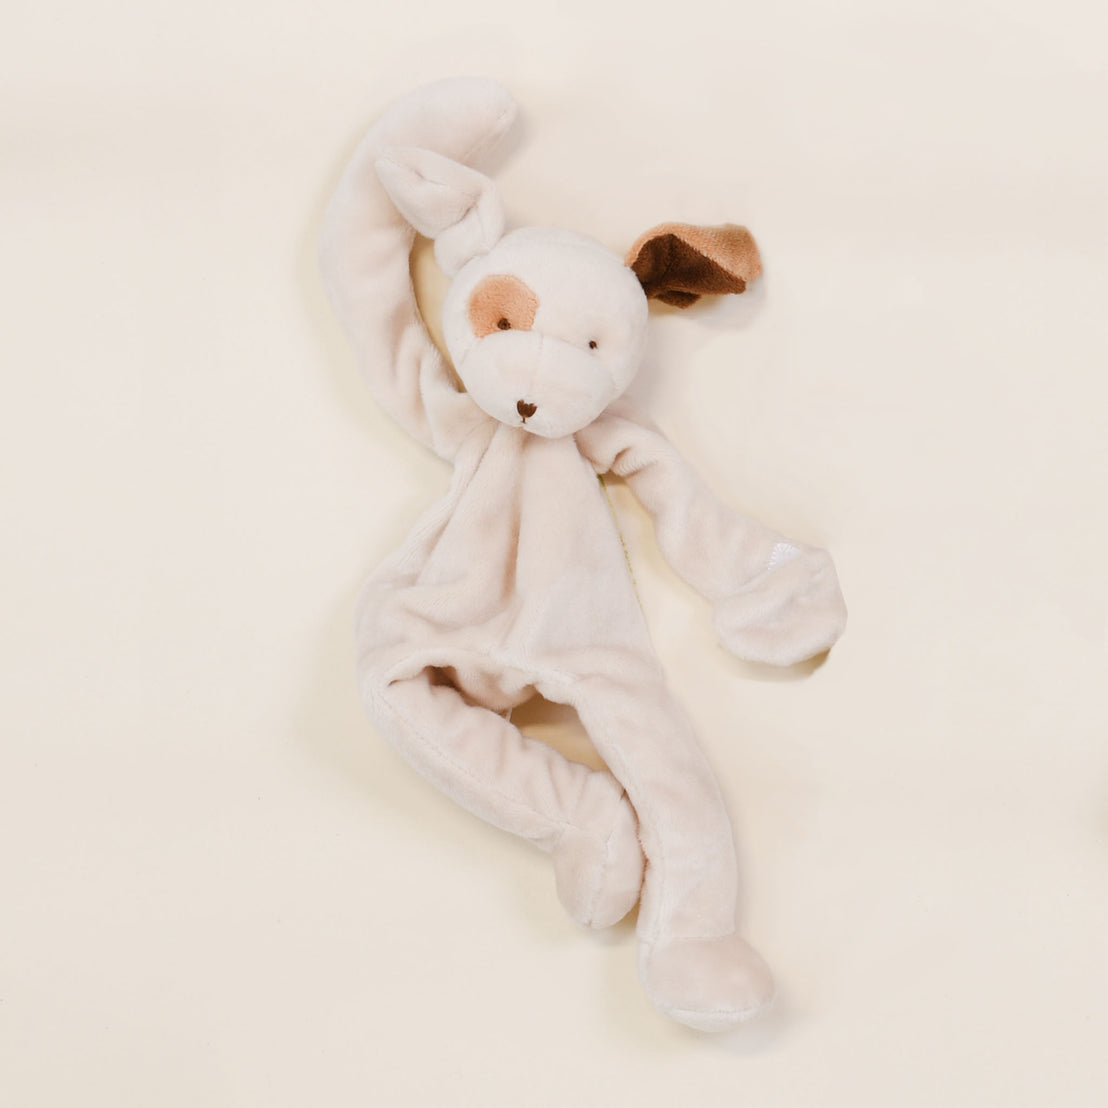 A soft, plush toy rabbit with floppy ears, one ear brown and the other white, on a light beige background. The Baby Beau & Belle Silly Puppy Buddy pacifier holder is lying flat, facing upwards.